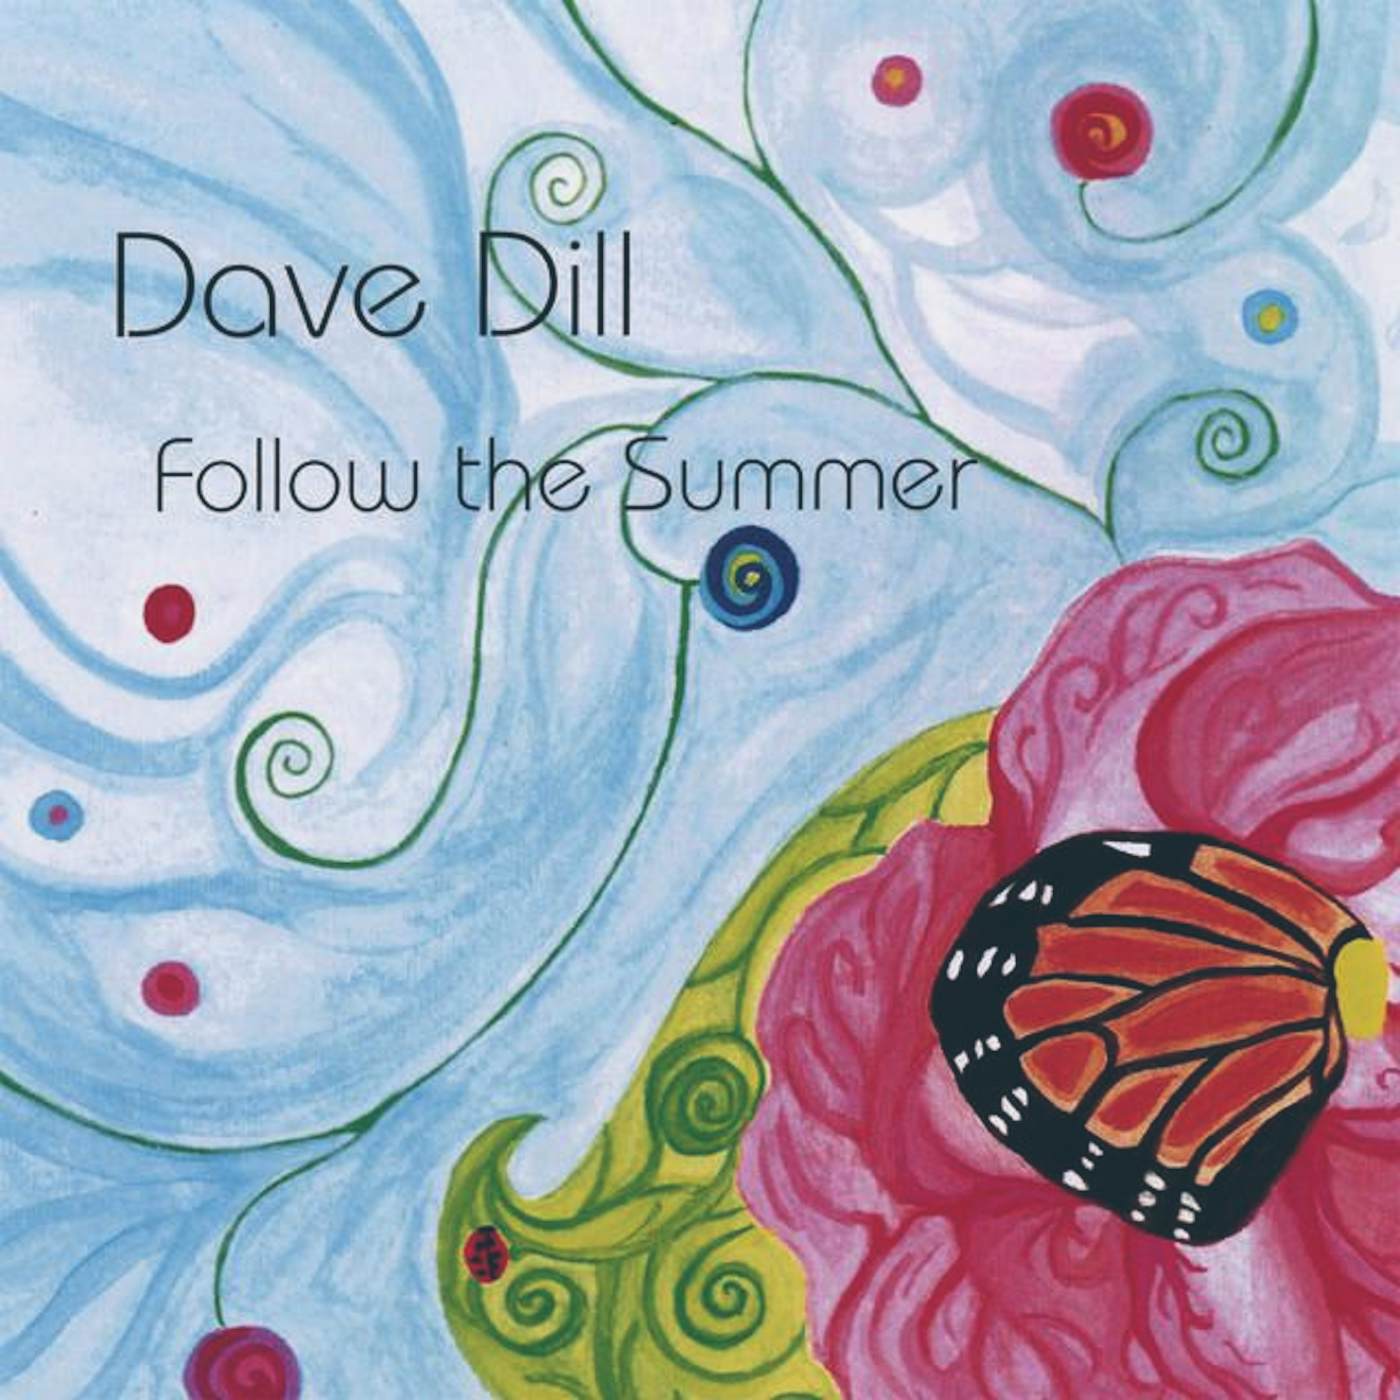 Dave Dill